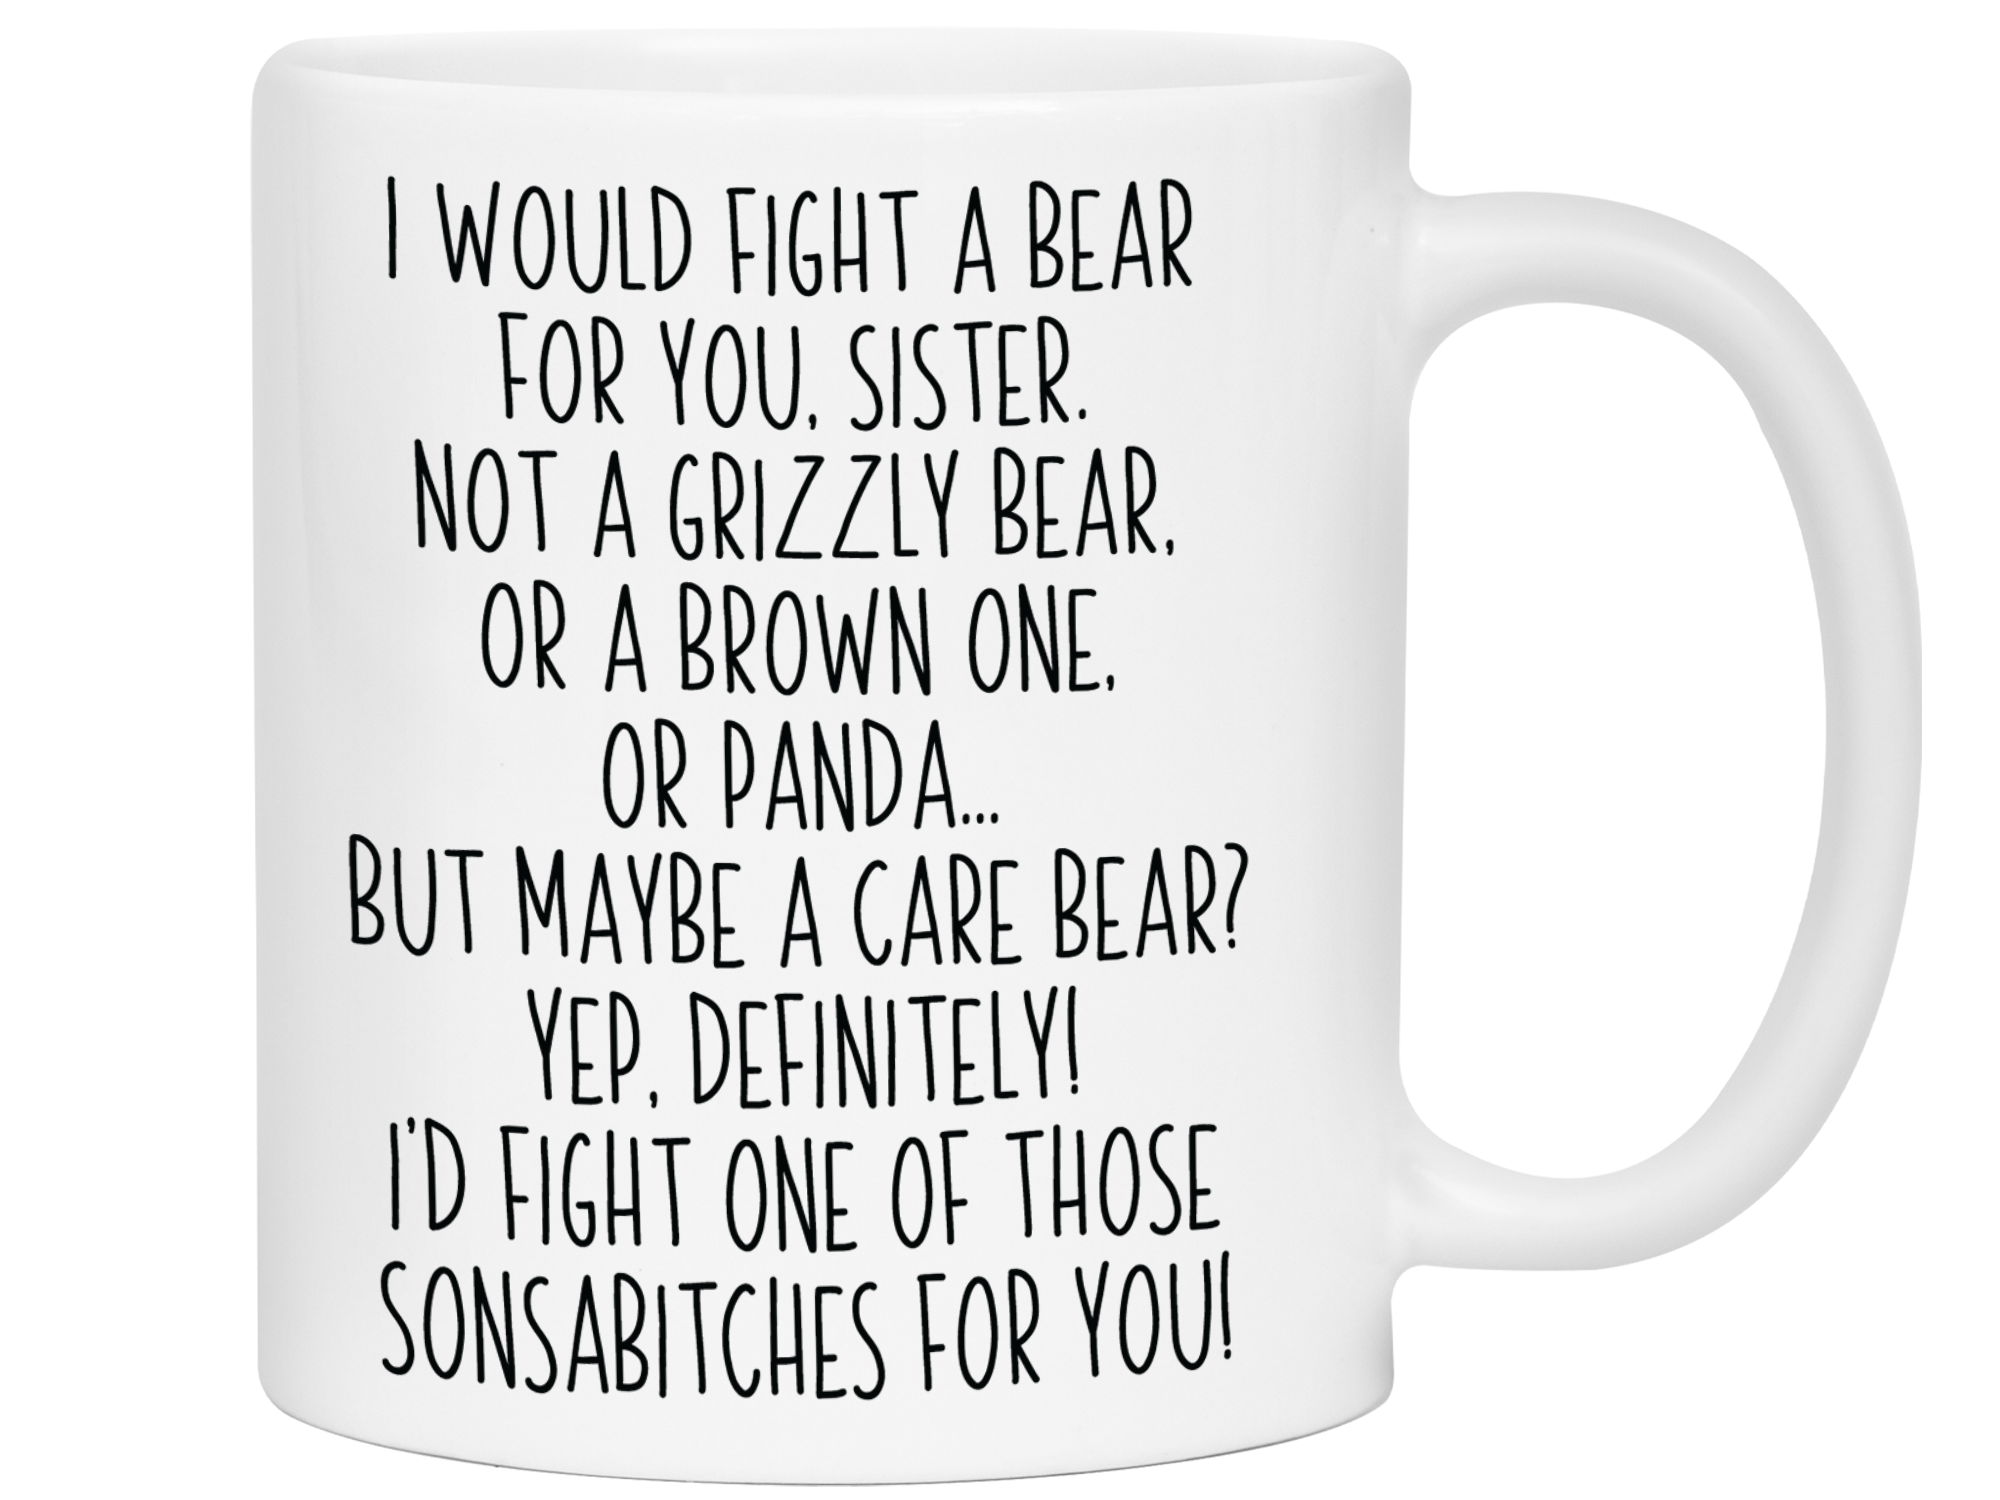 Funny Gifts for Sisters - I Would Fight a Bear for You Sister Gag Coffee Mug